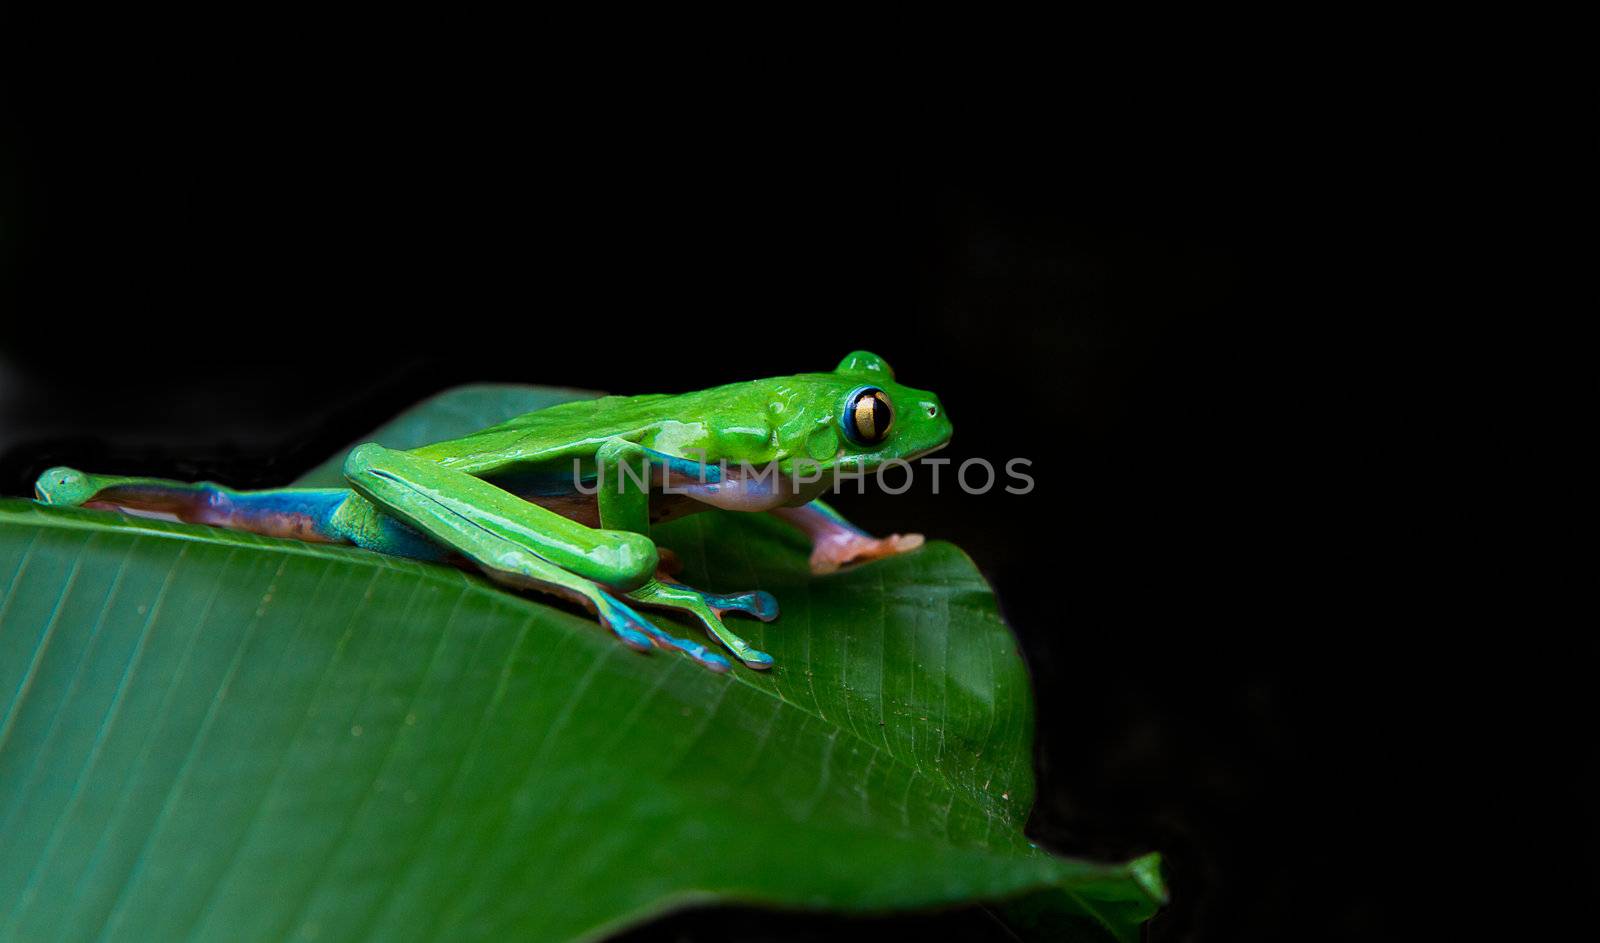 A beautiful blue sided leaf frog prepares to launch in the rainforests of Costa Rica.